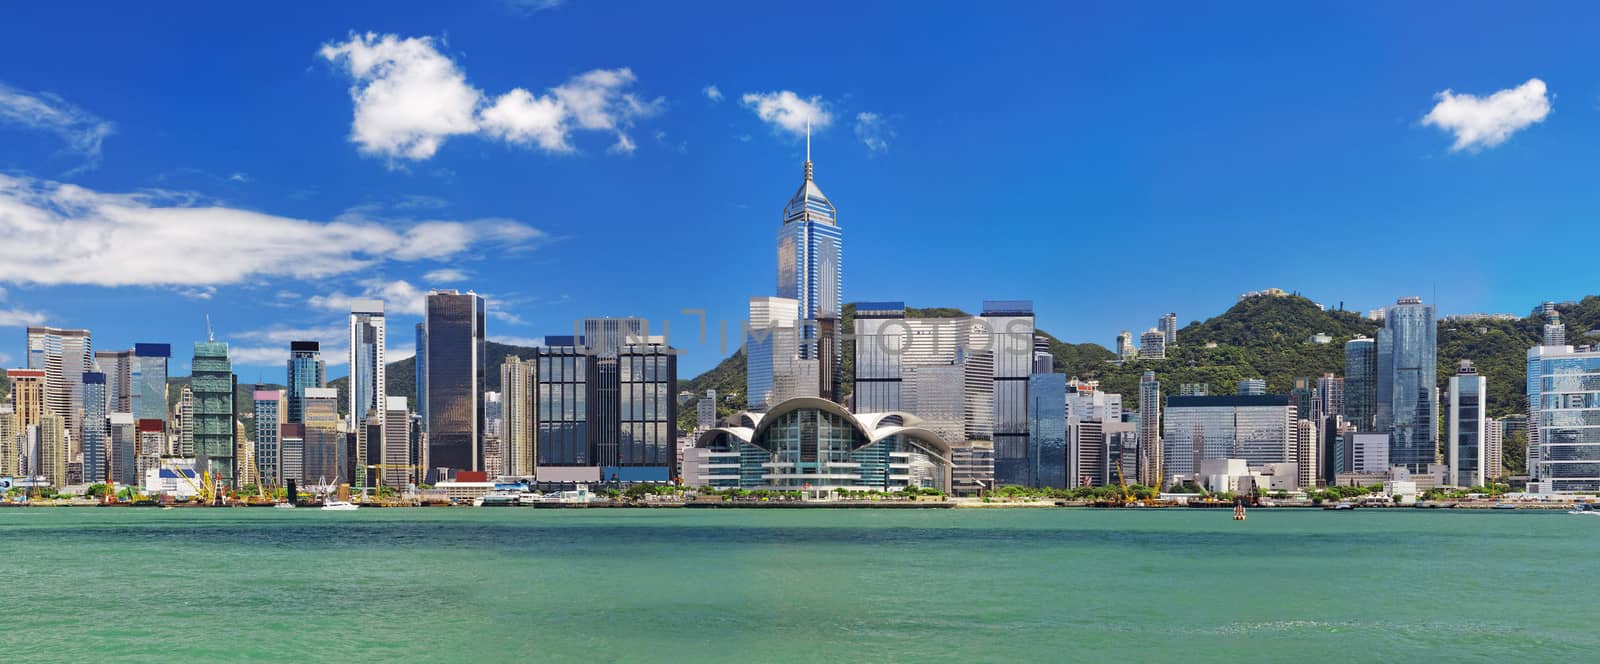 Hong Kong harbour at day  by cozyta